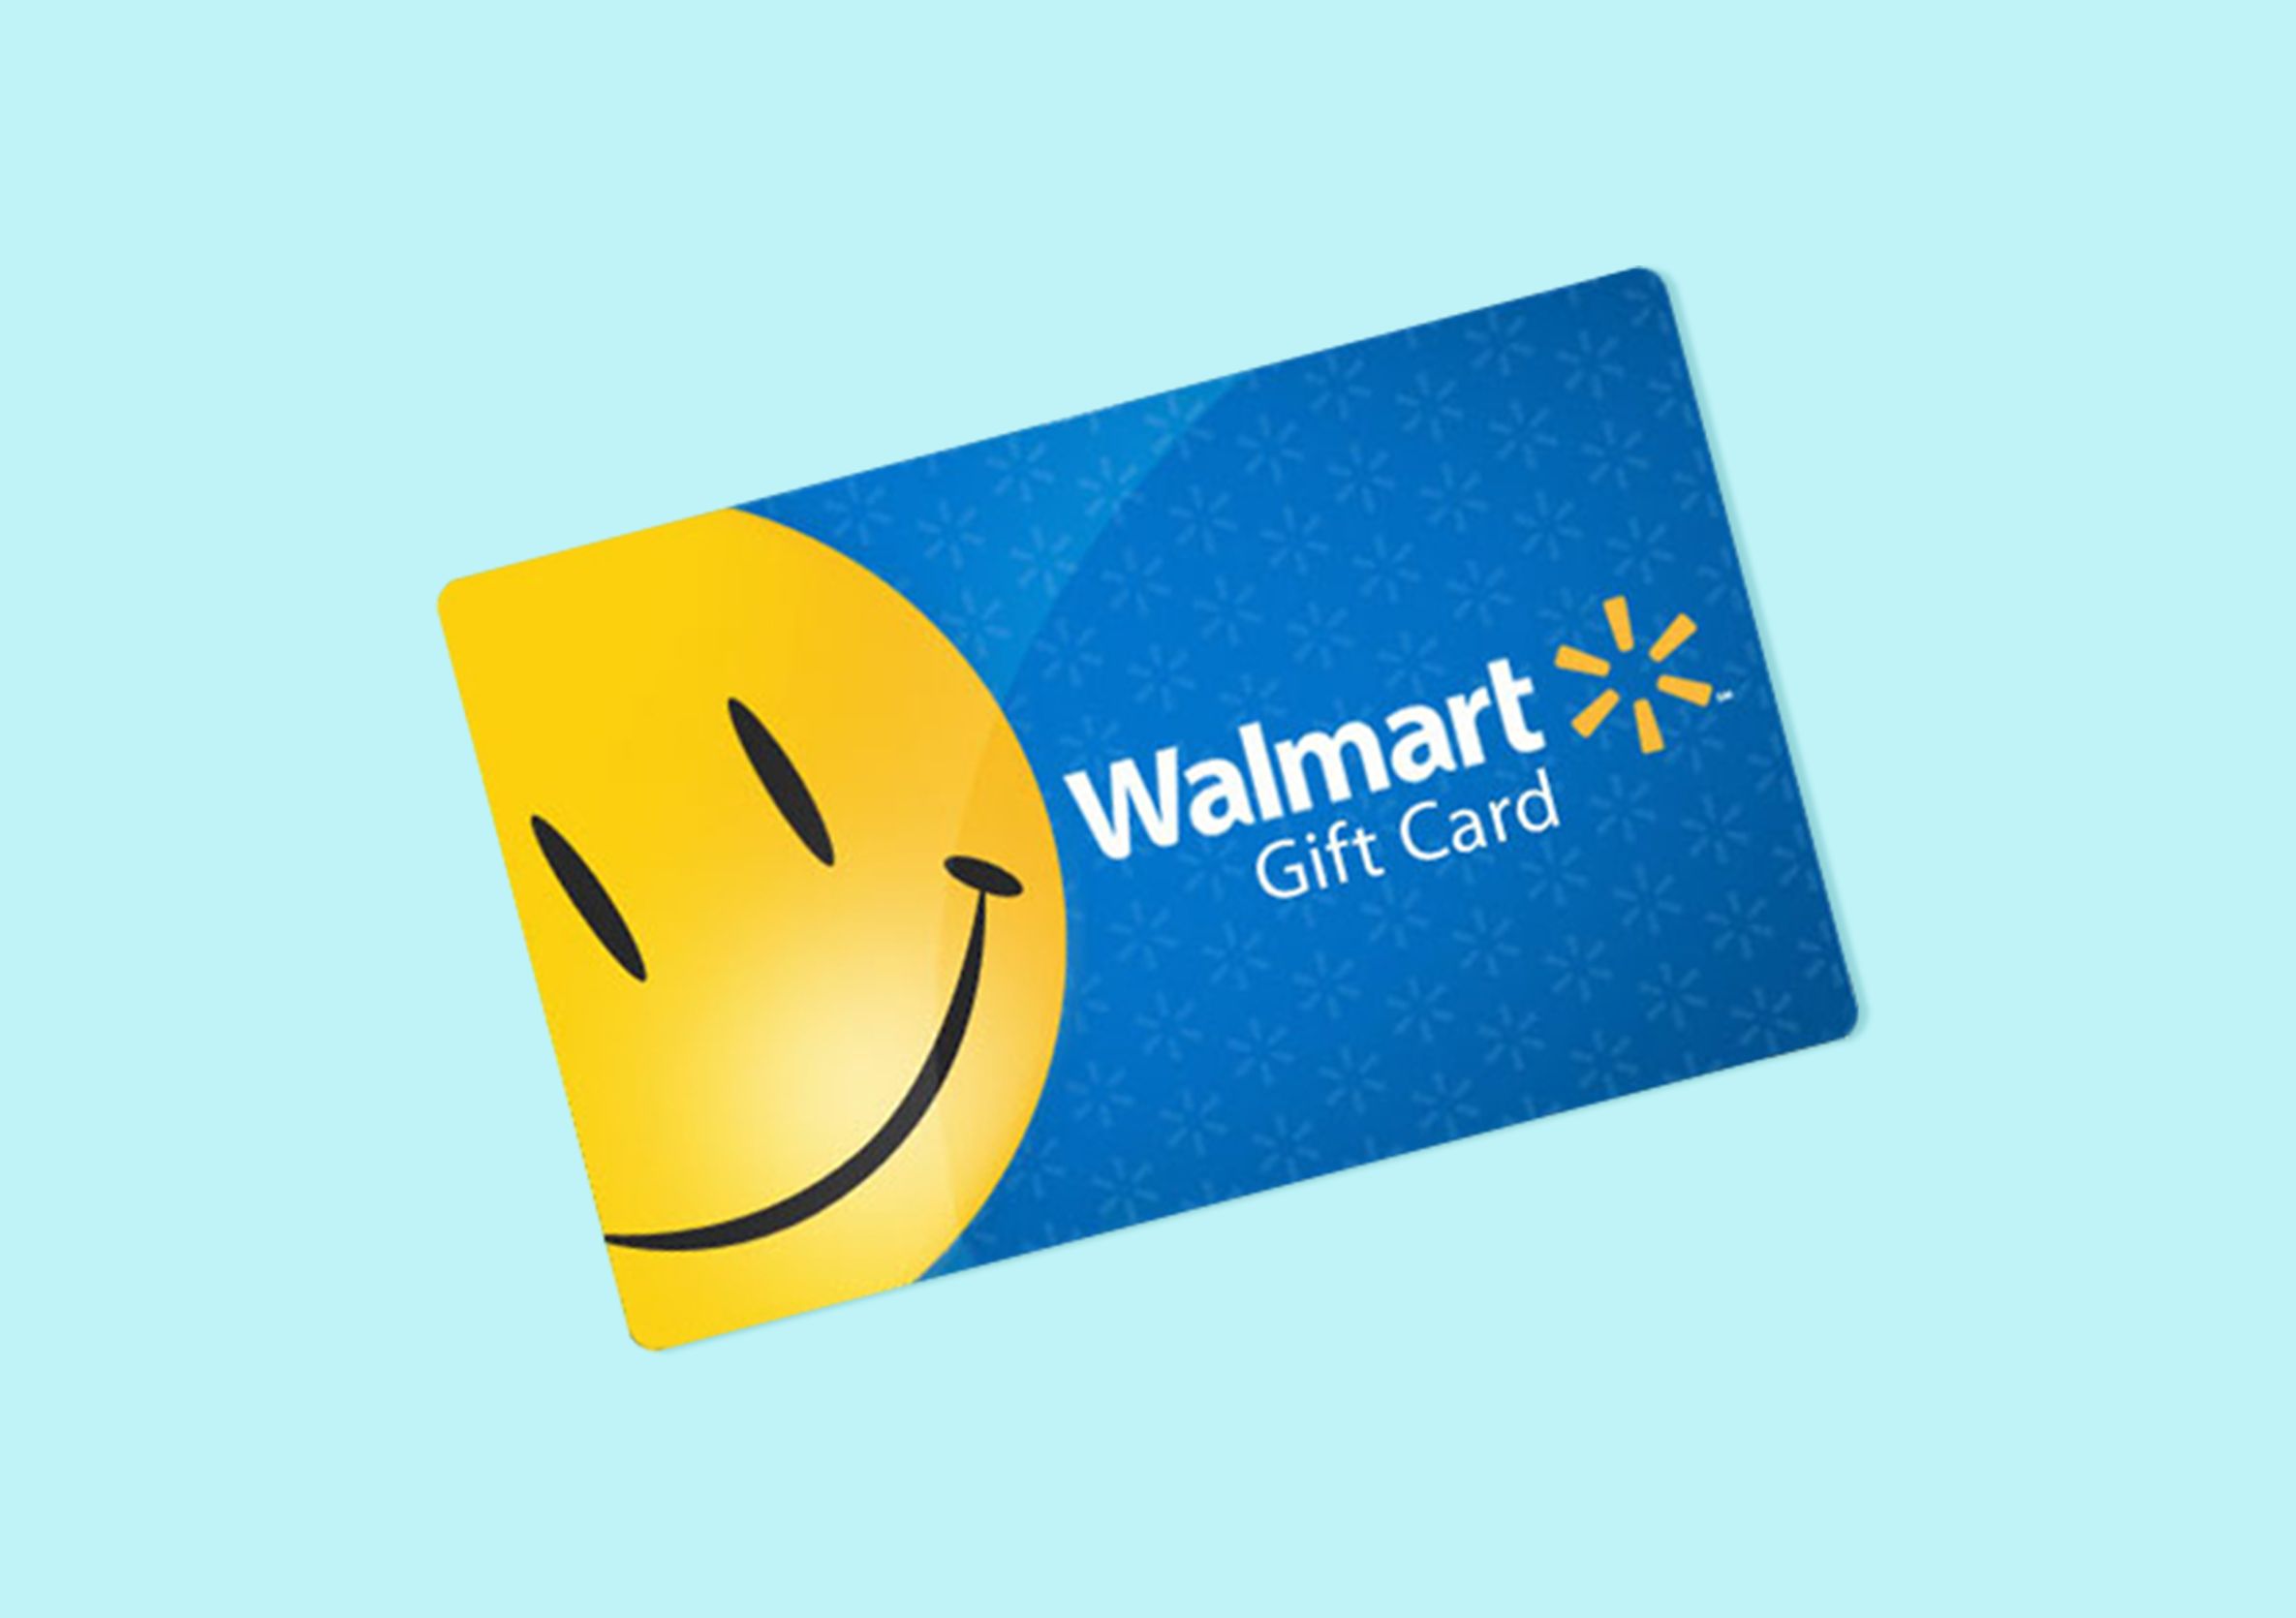 Conversion options for Walmart Gift Cards